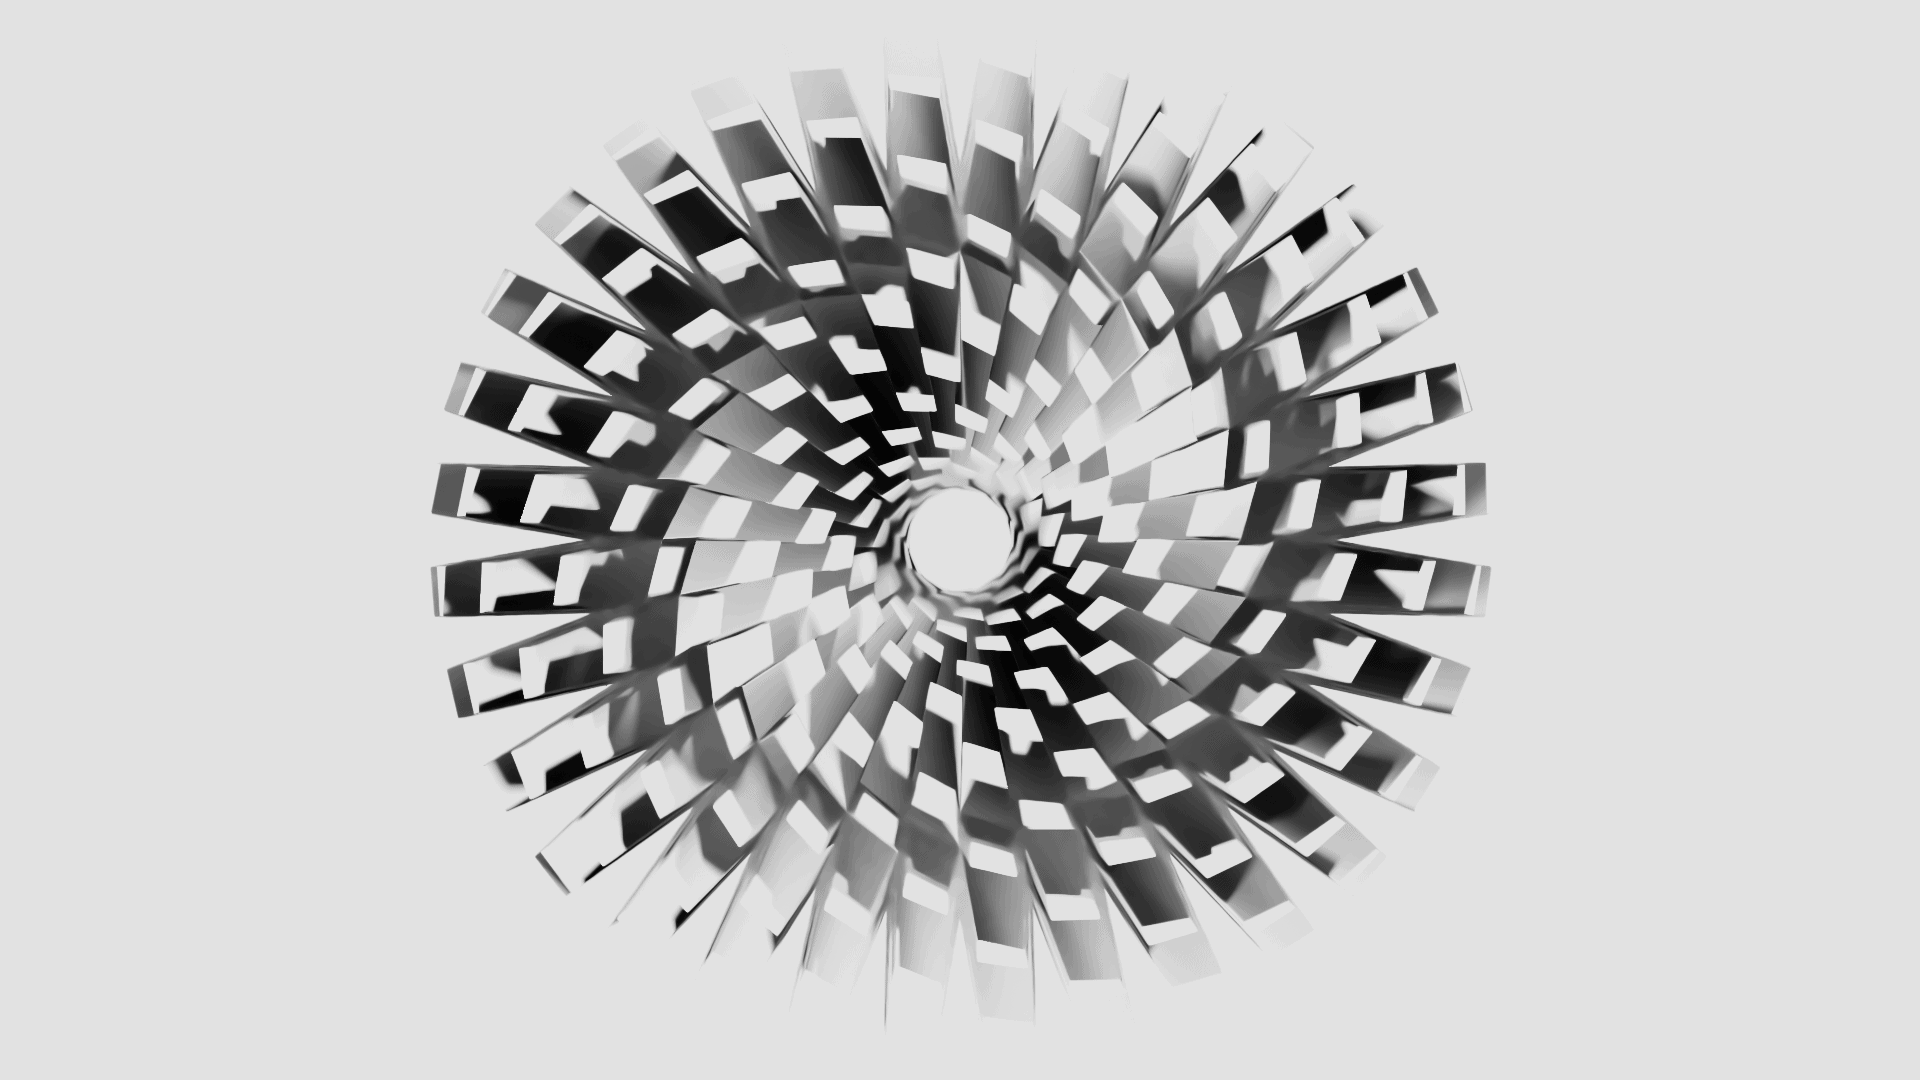 only the shadows of interrupted spirals within spirals with extrusions confusing them and multiplying them